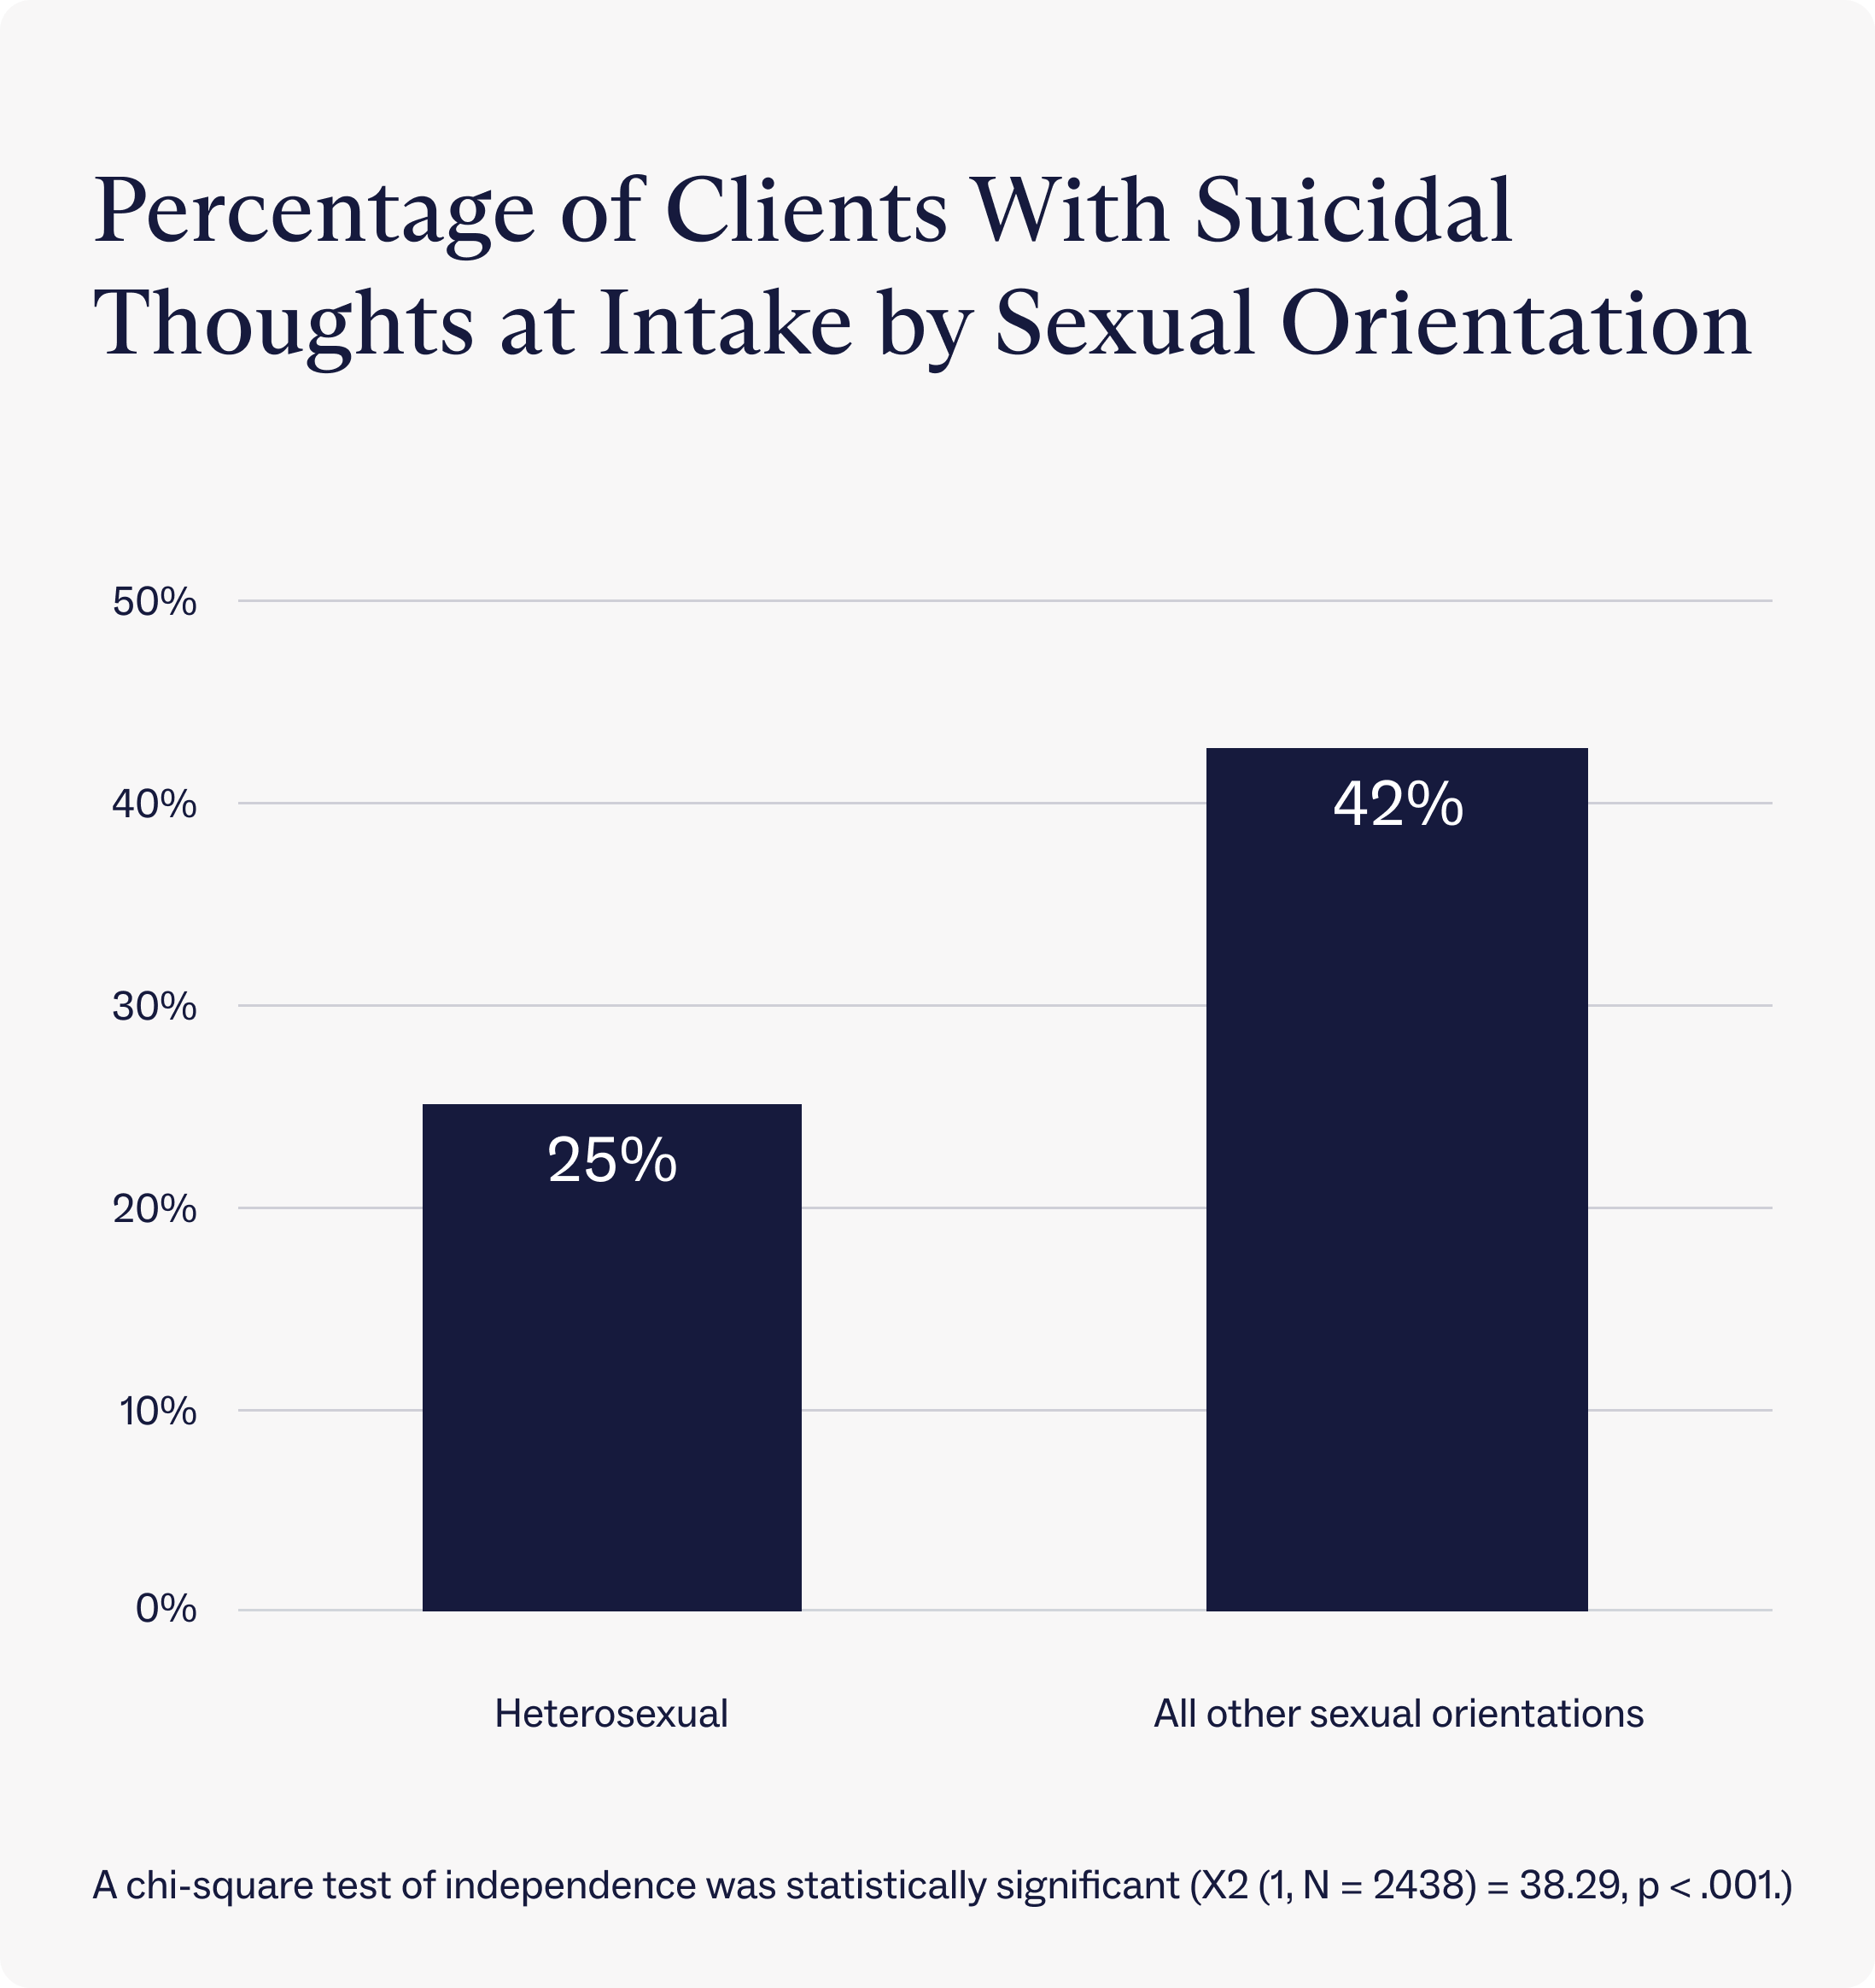 Percentage of Charlie Health clients with suicidal thoughts at intake by sexual orientation